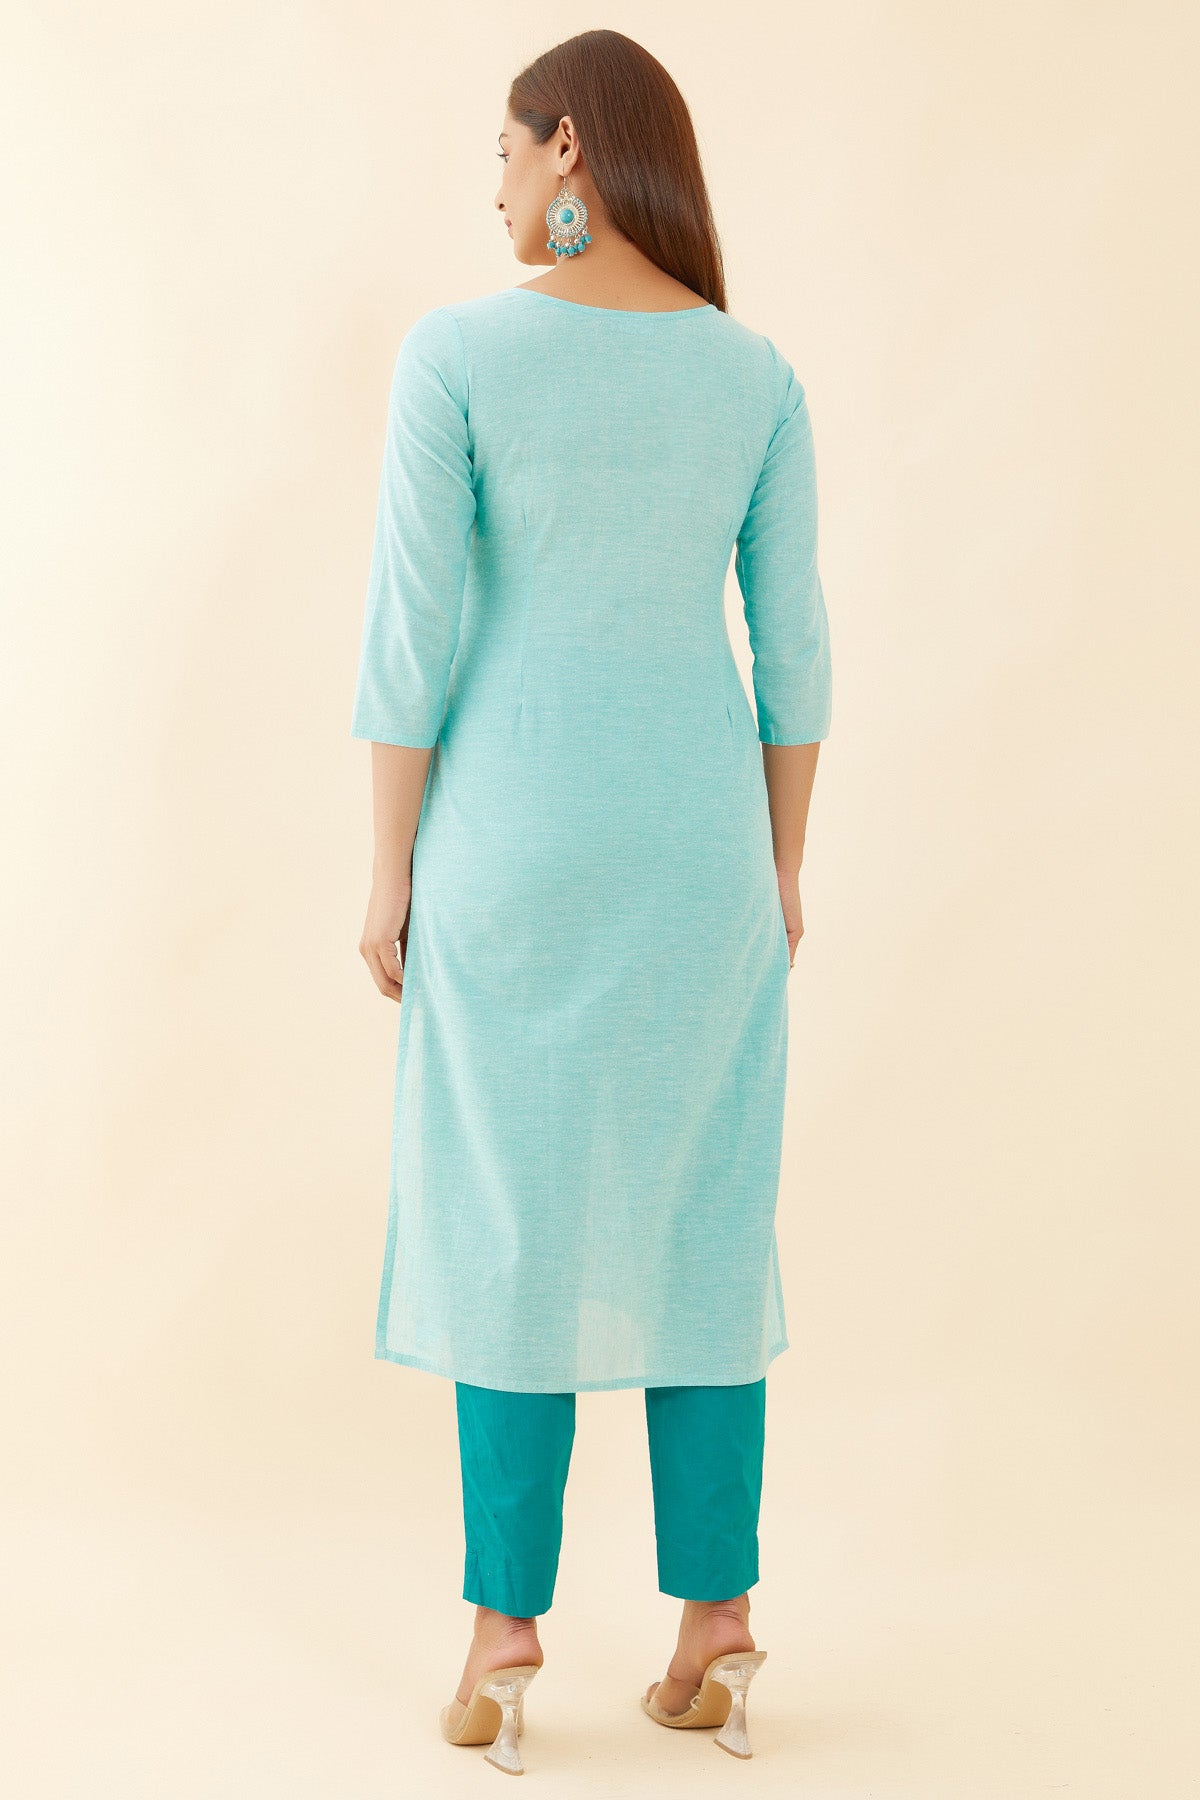 Contrast Floral Embroidered Kurta - Blue